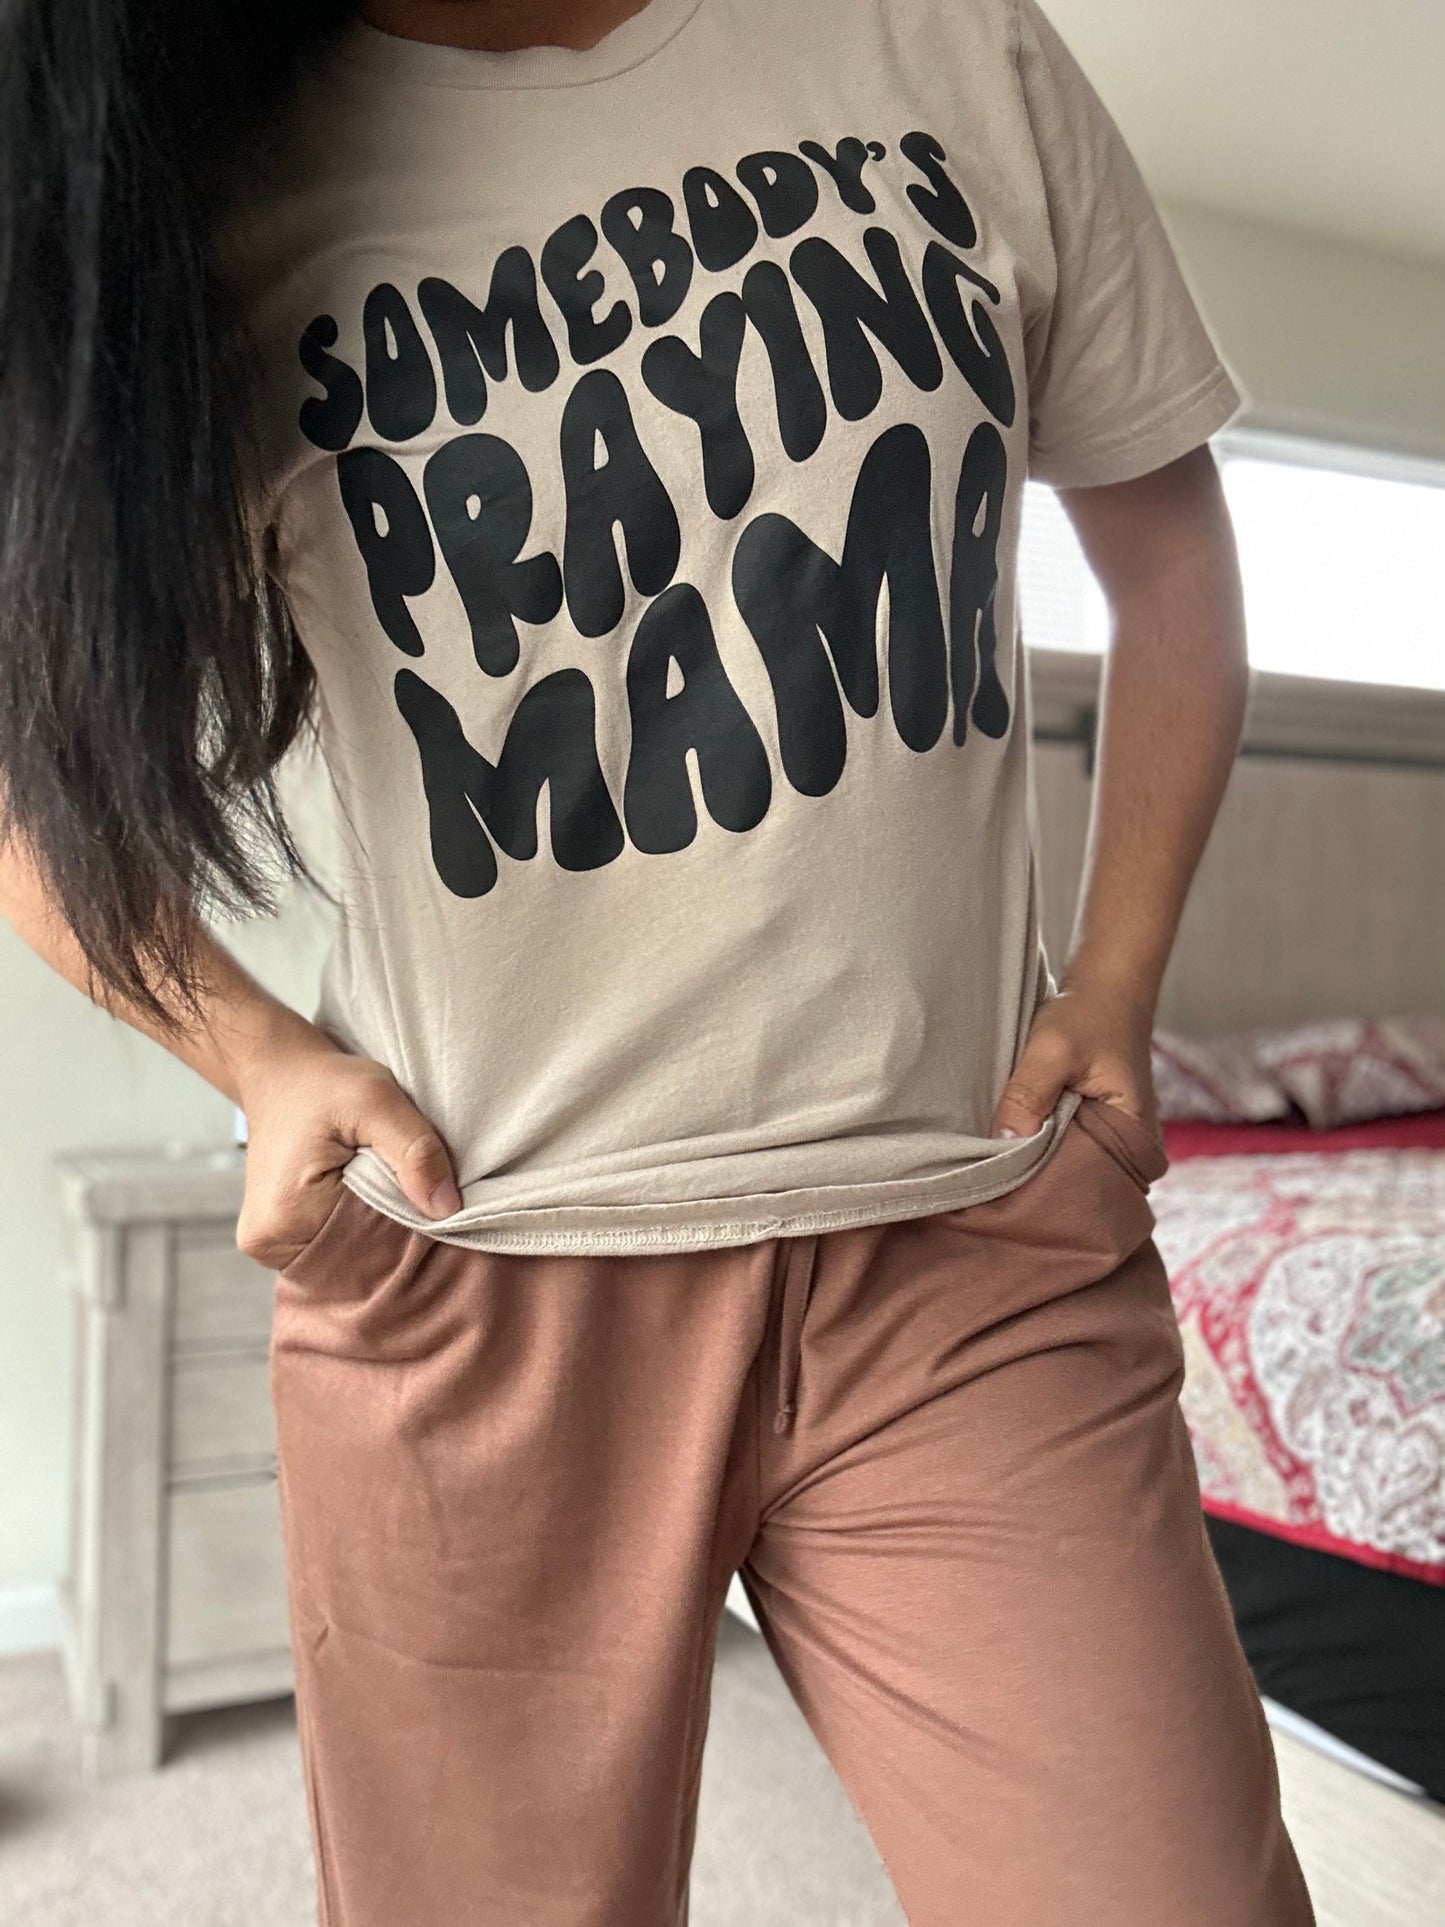 Somebody’s praying mama *not exclusive to dec*